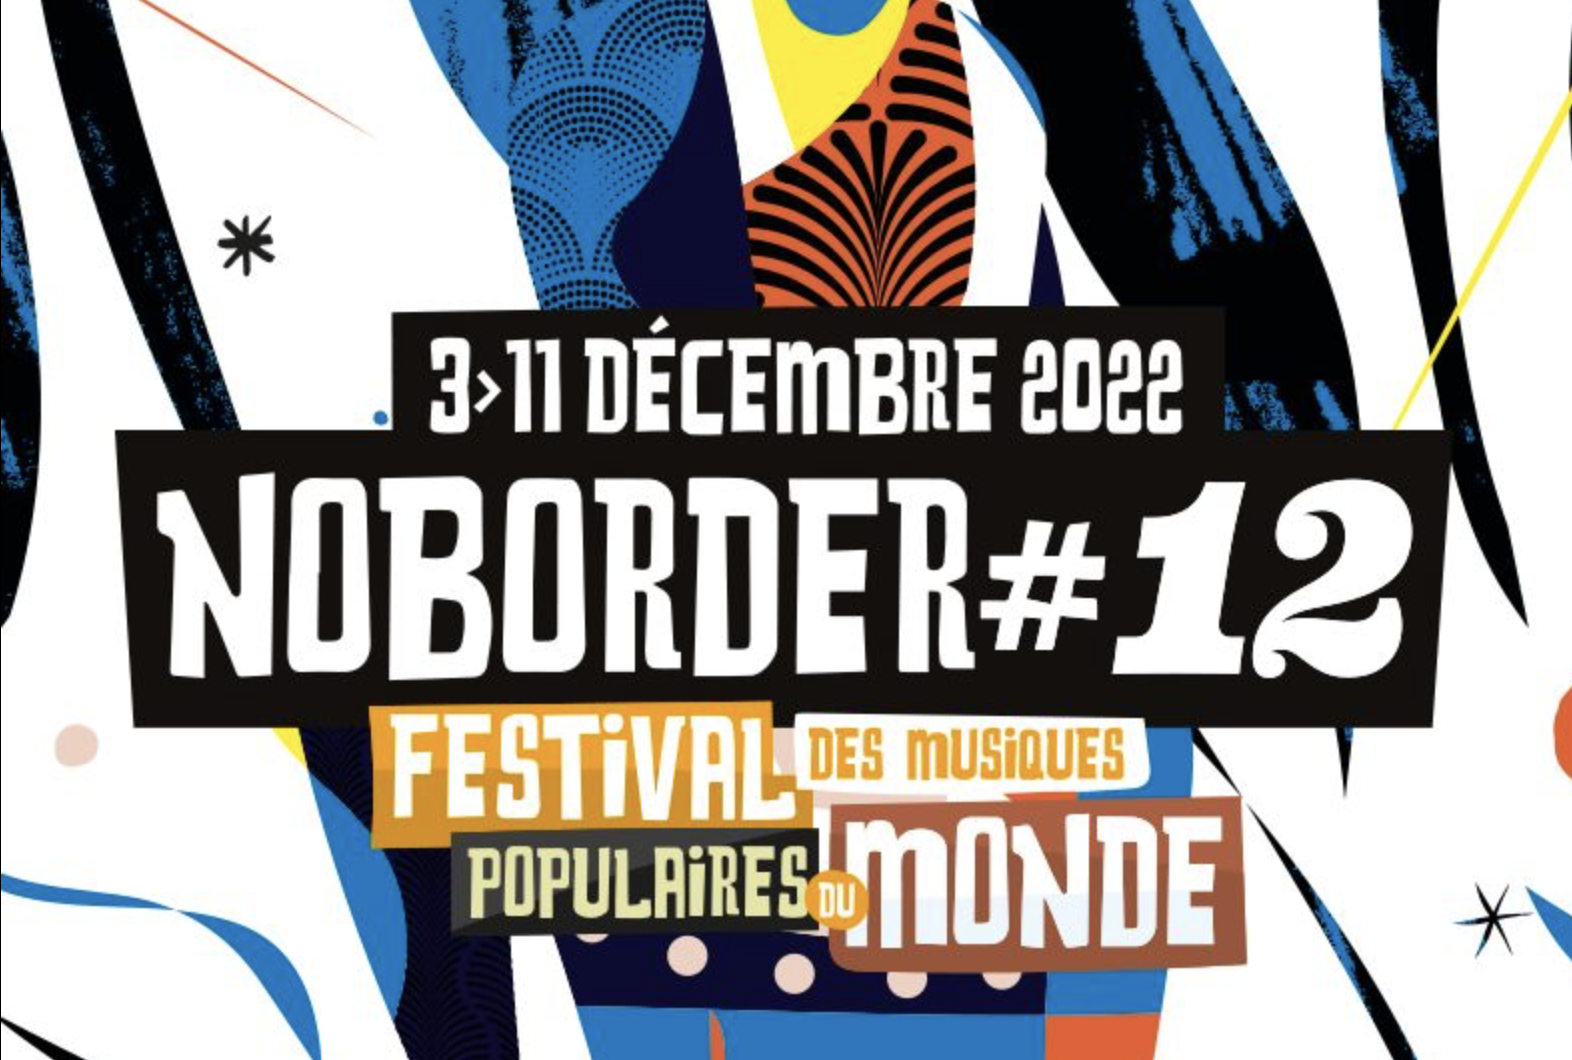 You are currently viewing Festival No Border #12